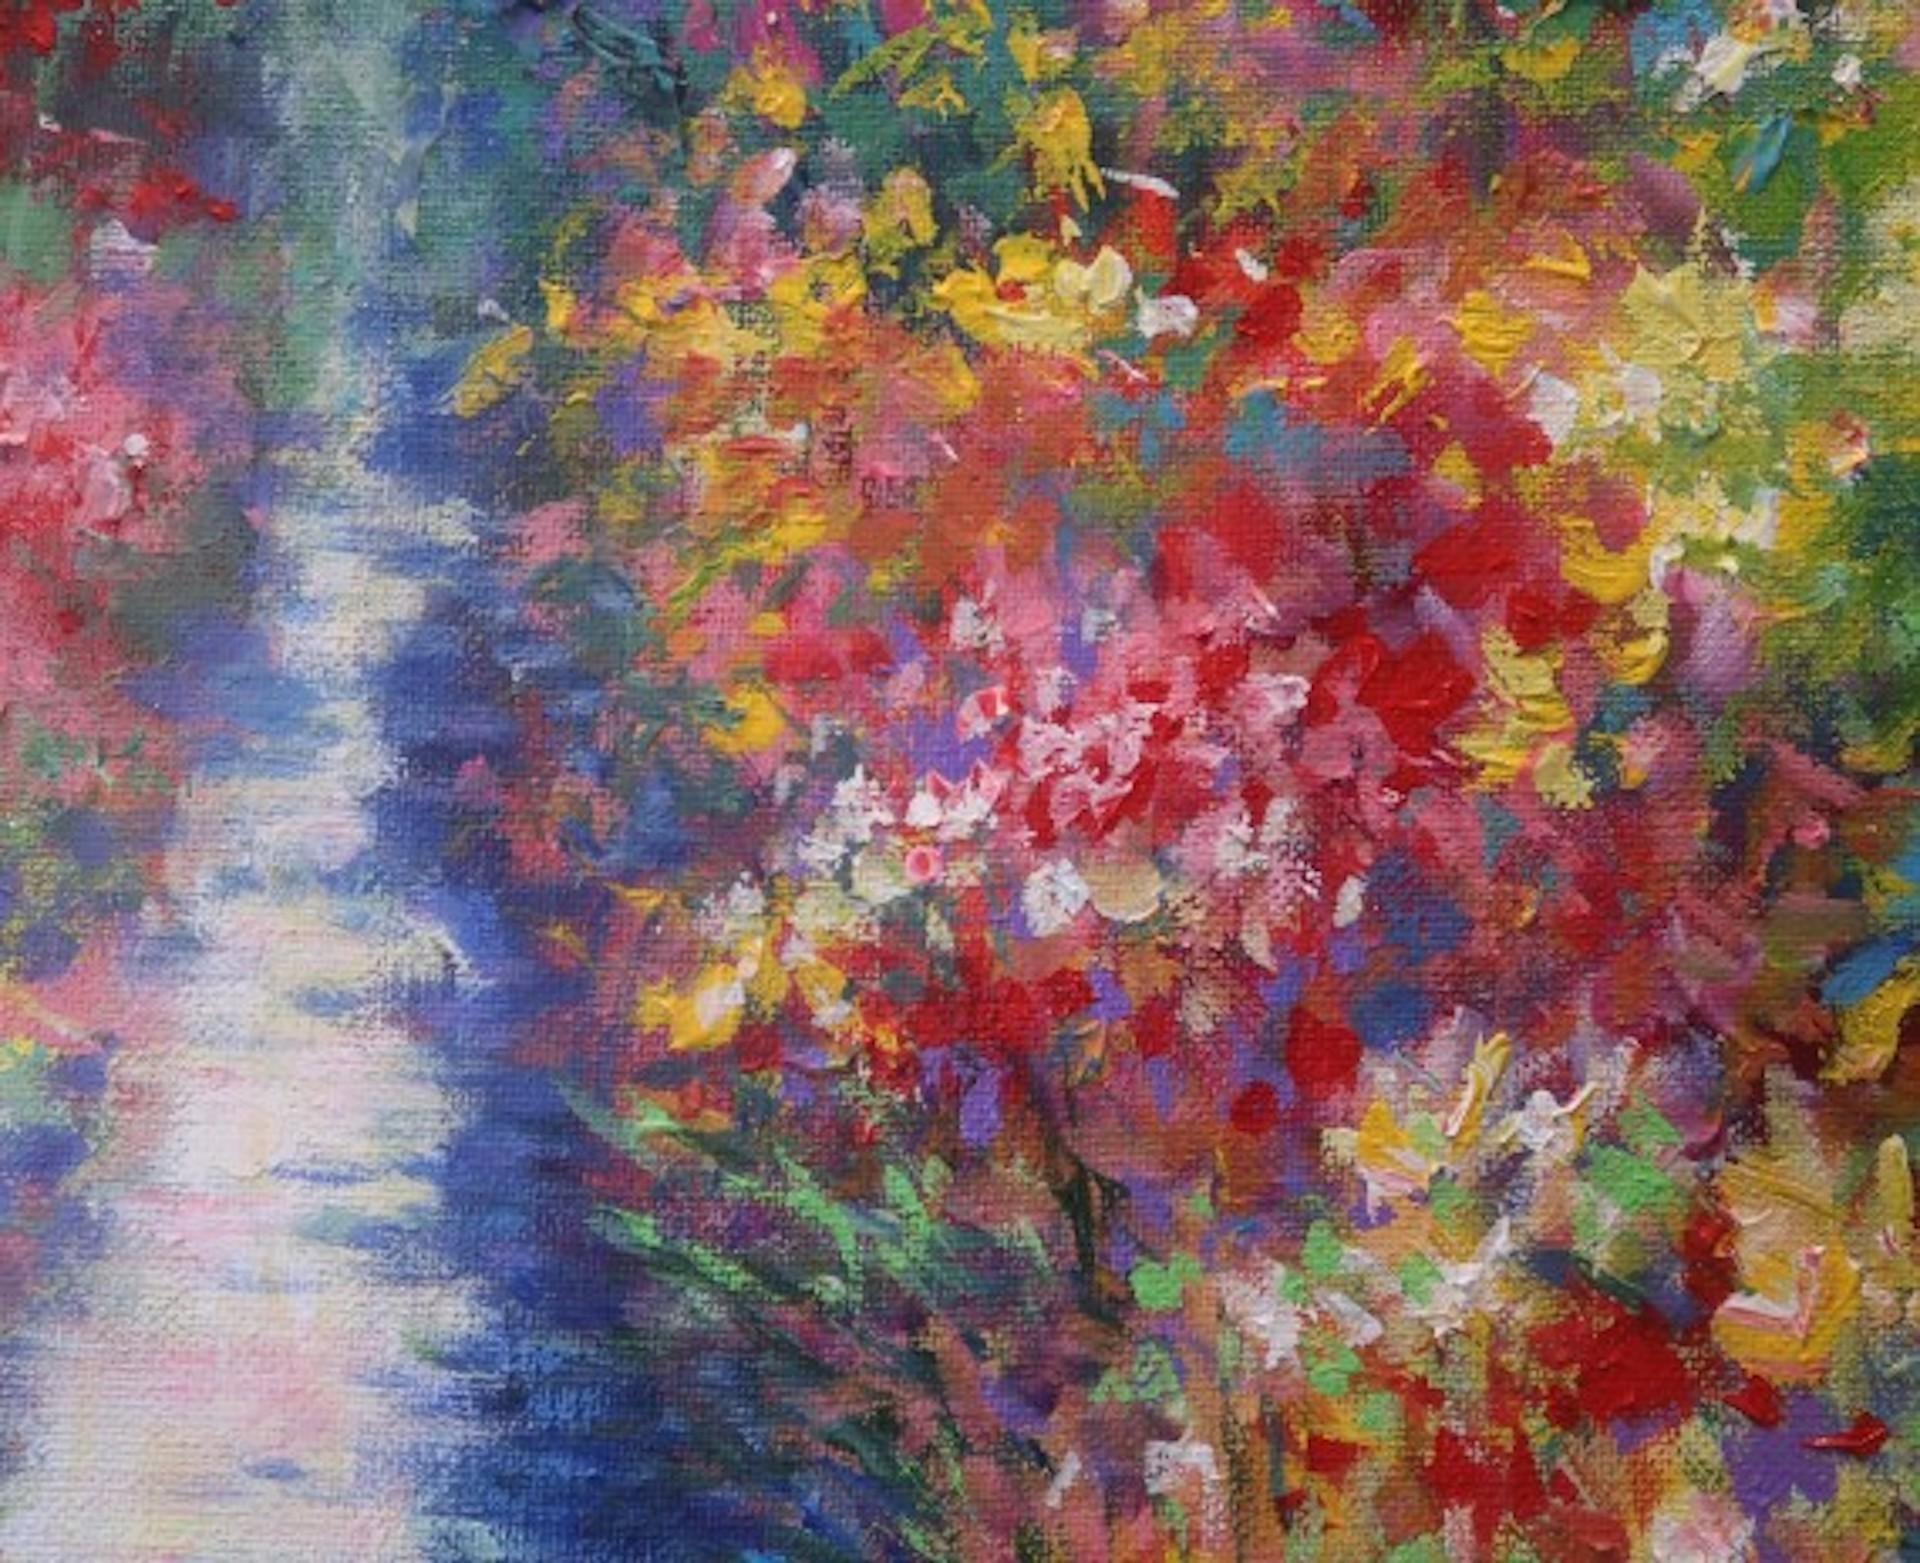 Rose Time At Monet's Garden, Mary Chaplin, Original, Floral Landscape Painting 1